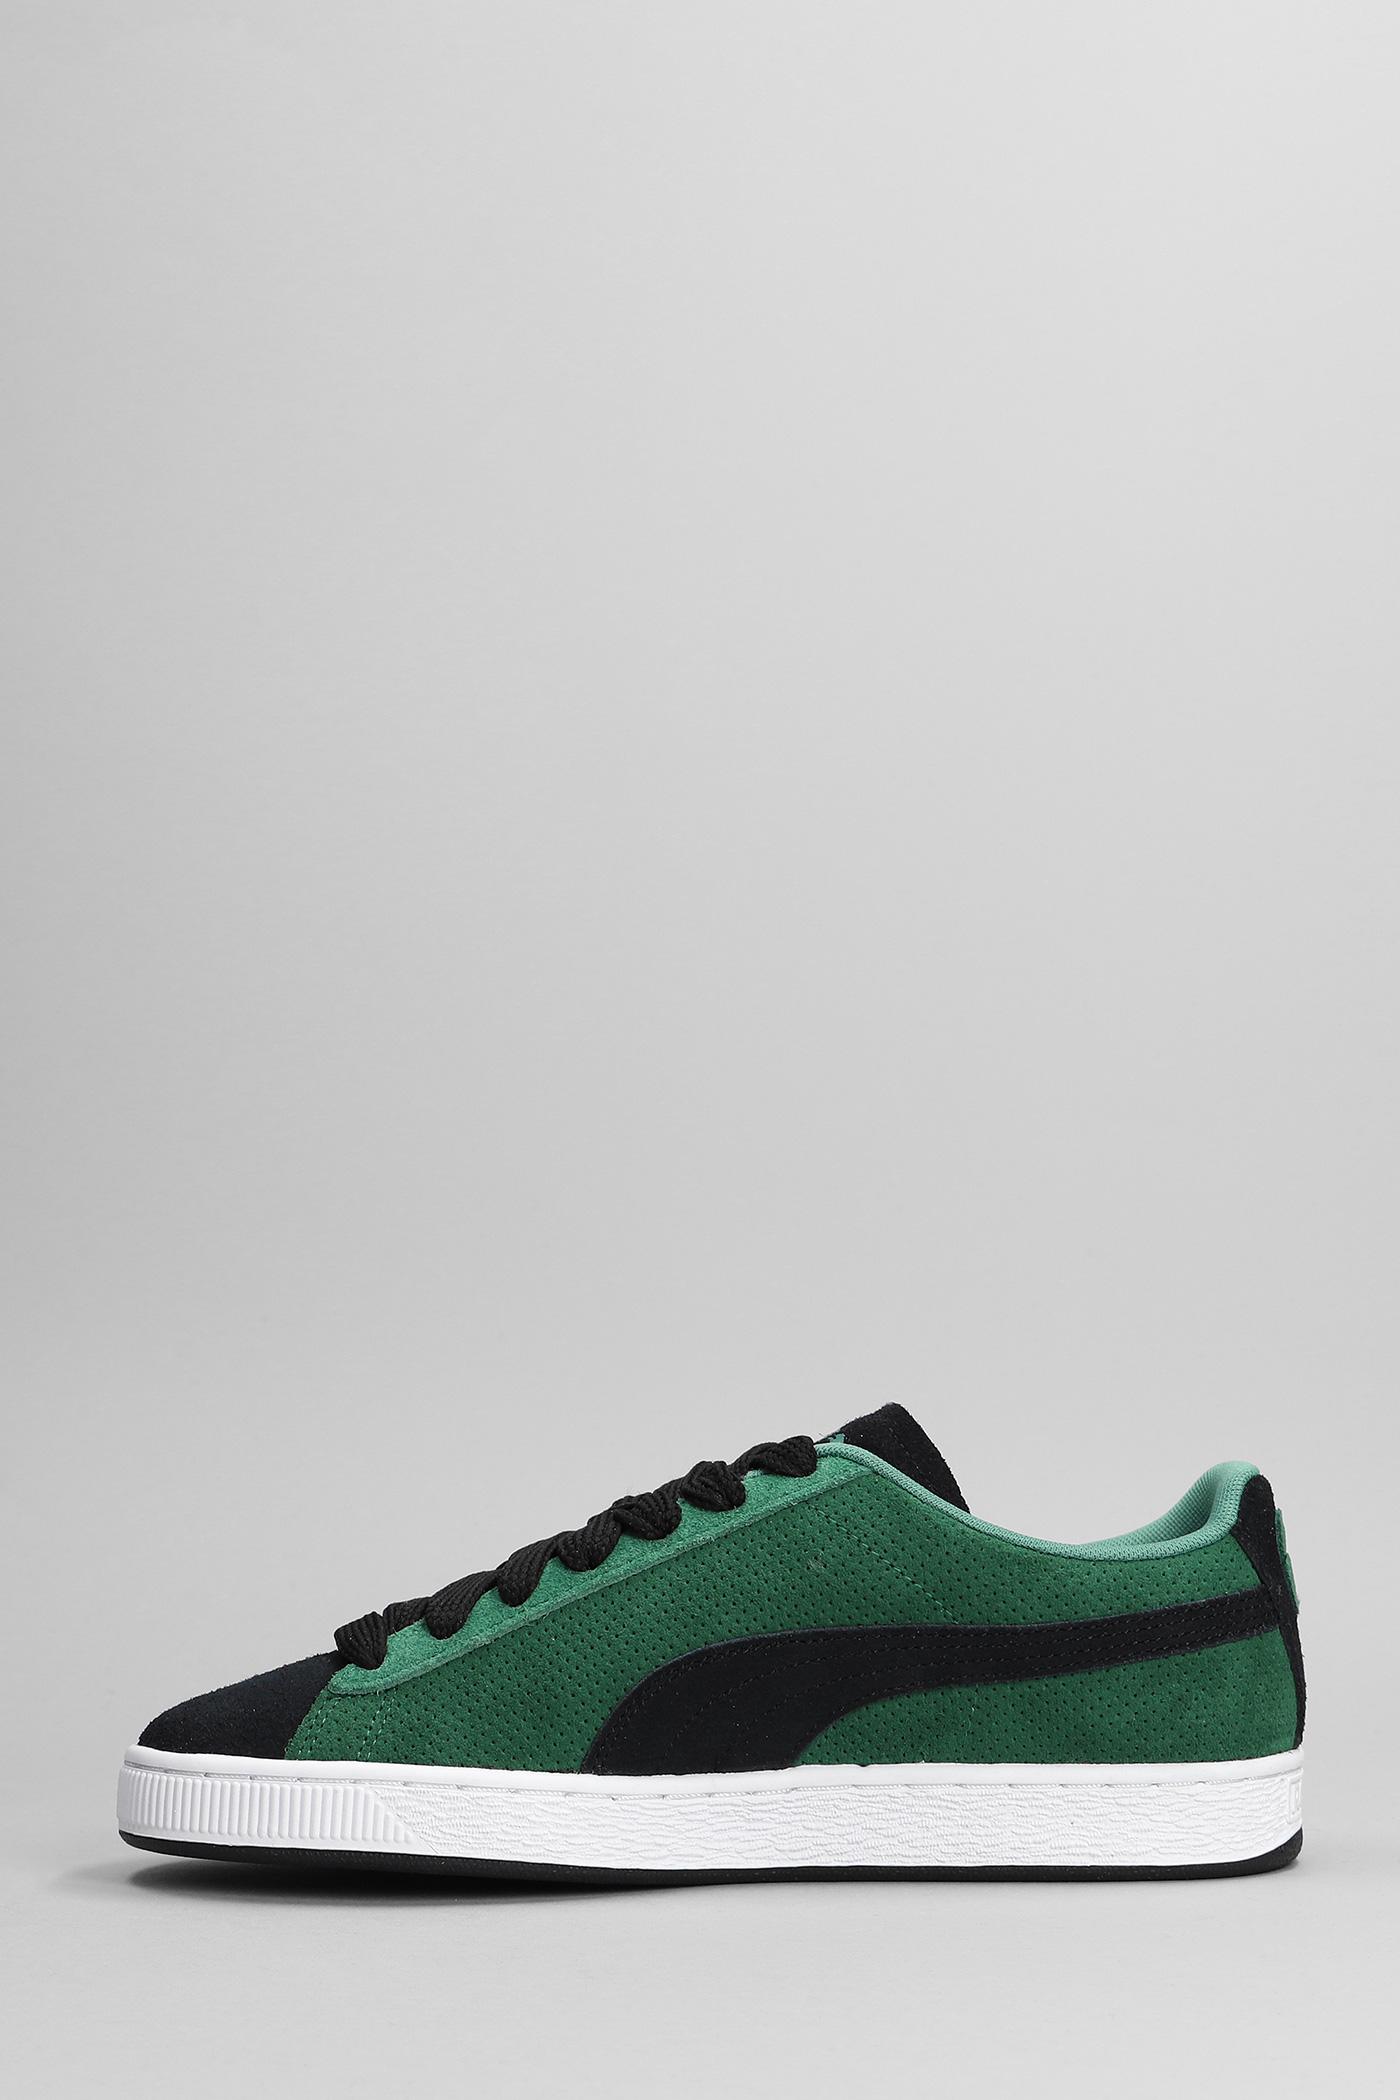 PUMA Archive Remastered Sneakers In Black Suede in Green for Men | Lyst